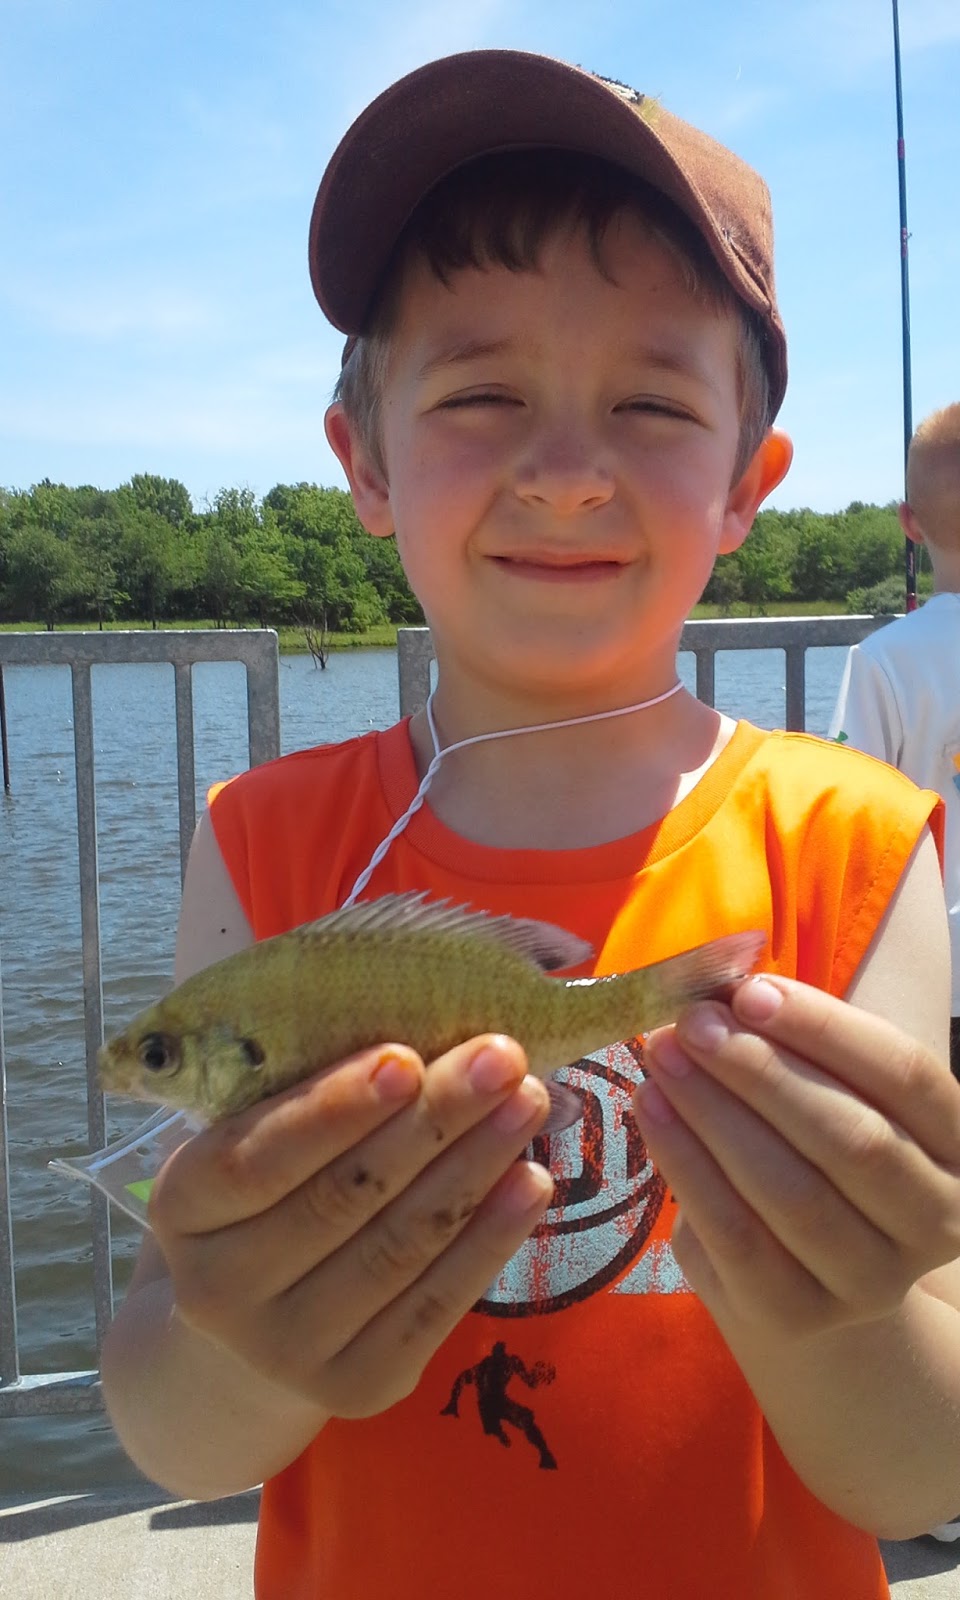 The Show Me Fly Guy: Taking kids fishing has little to do with